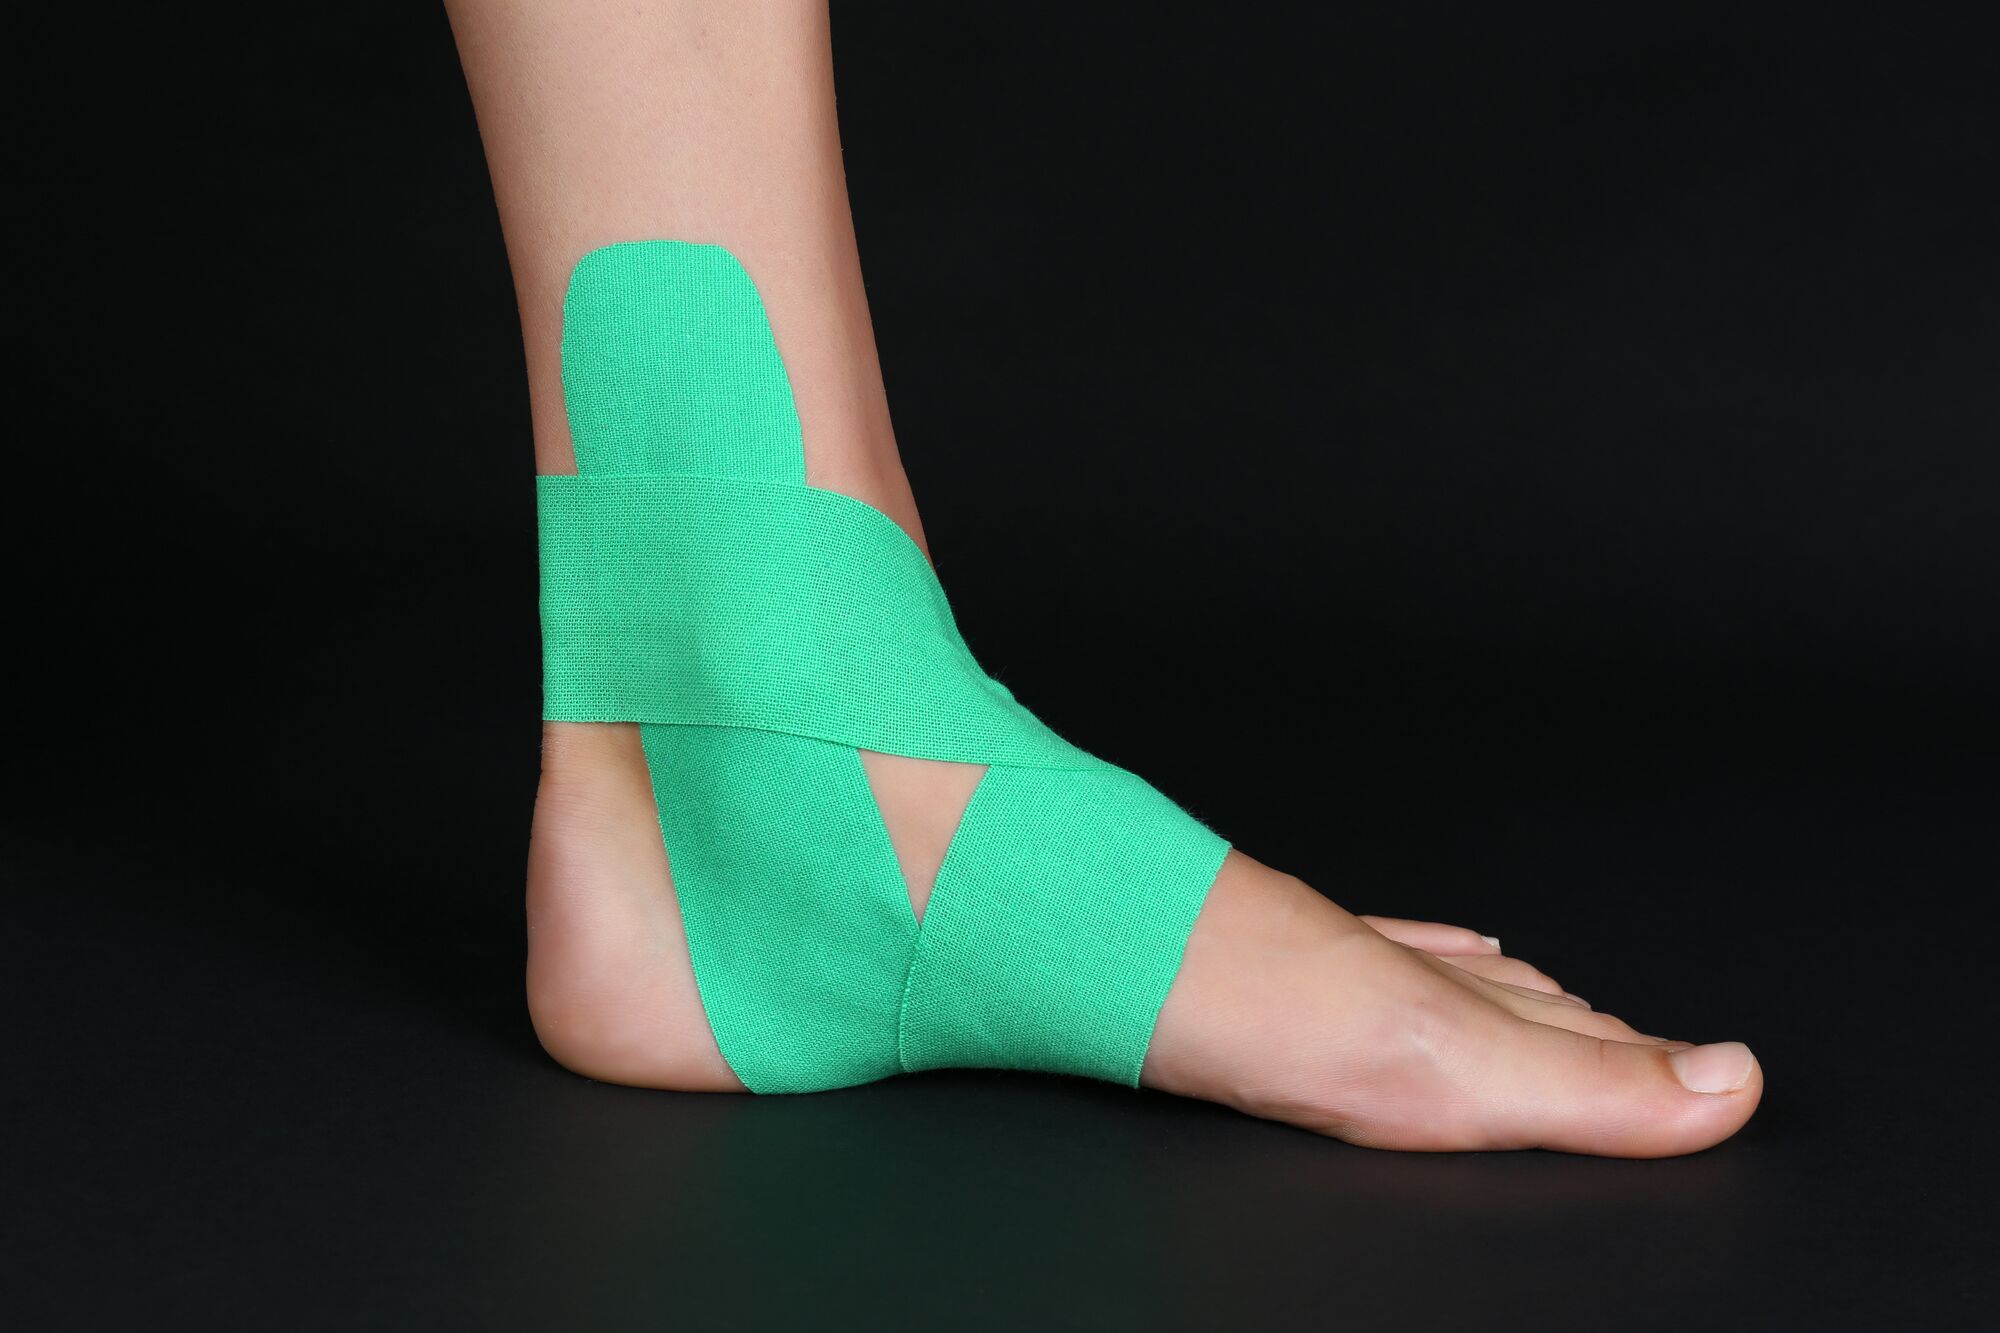 Shockwave Therapy for Plantar Fasciitis - Thrive Now Physiotherapy